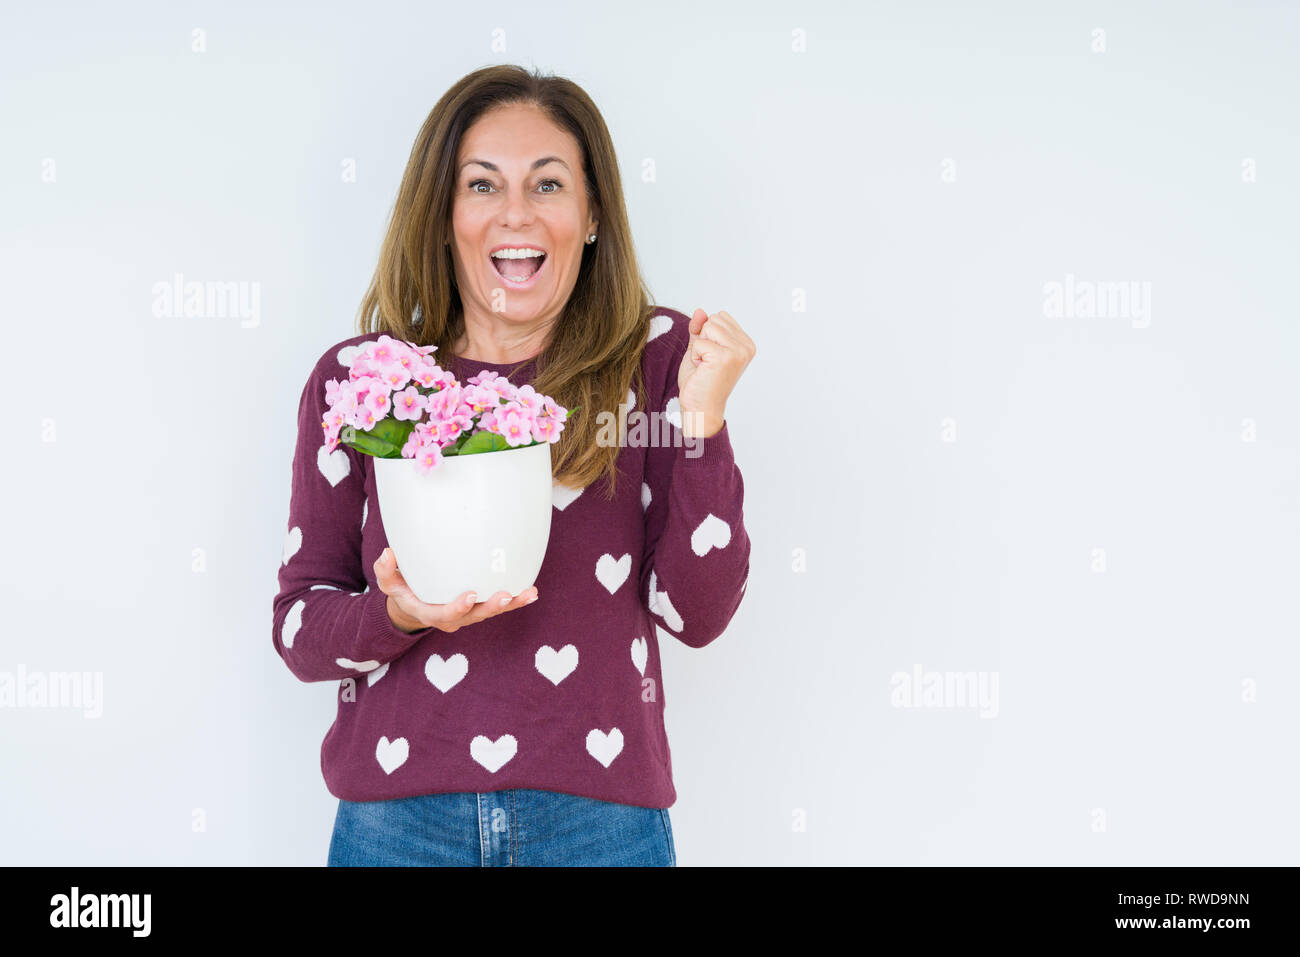 Middle age woman holding flowers pot plant over isolated background screaming proud and celebrating victory and success very excited, cheering emotion Stock Photo